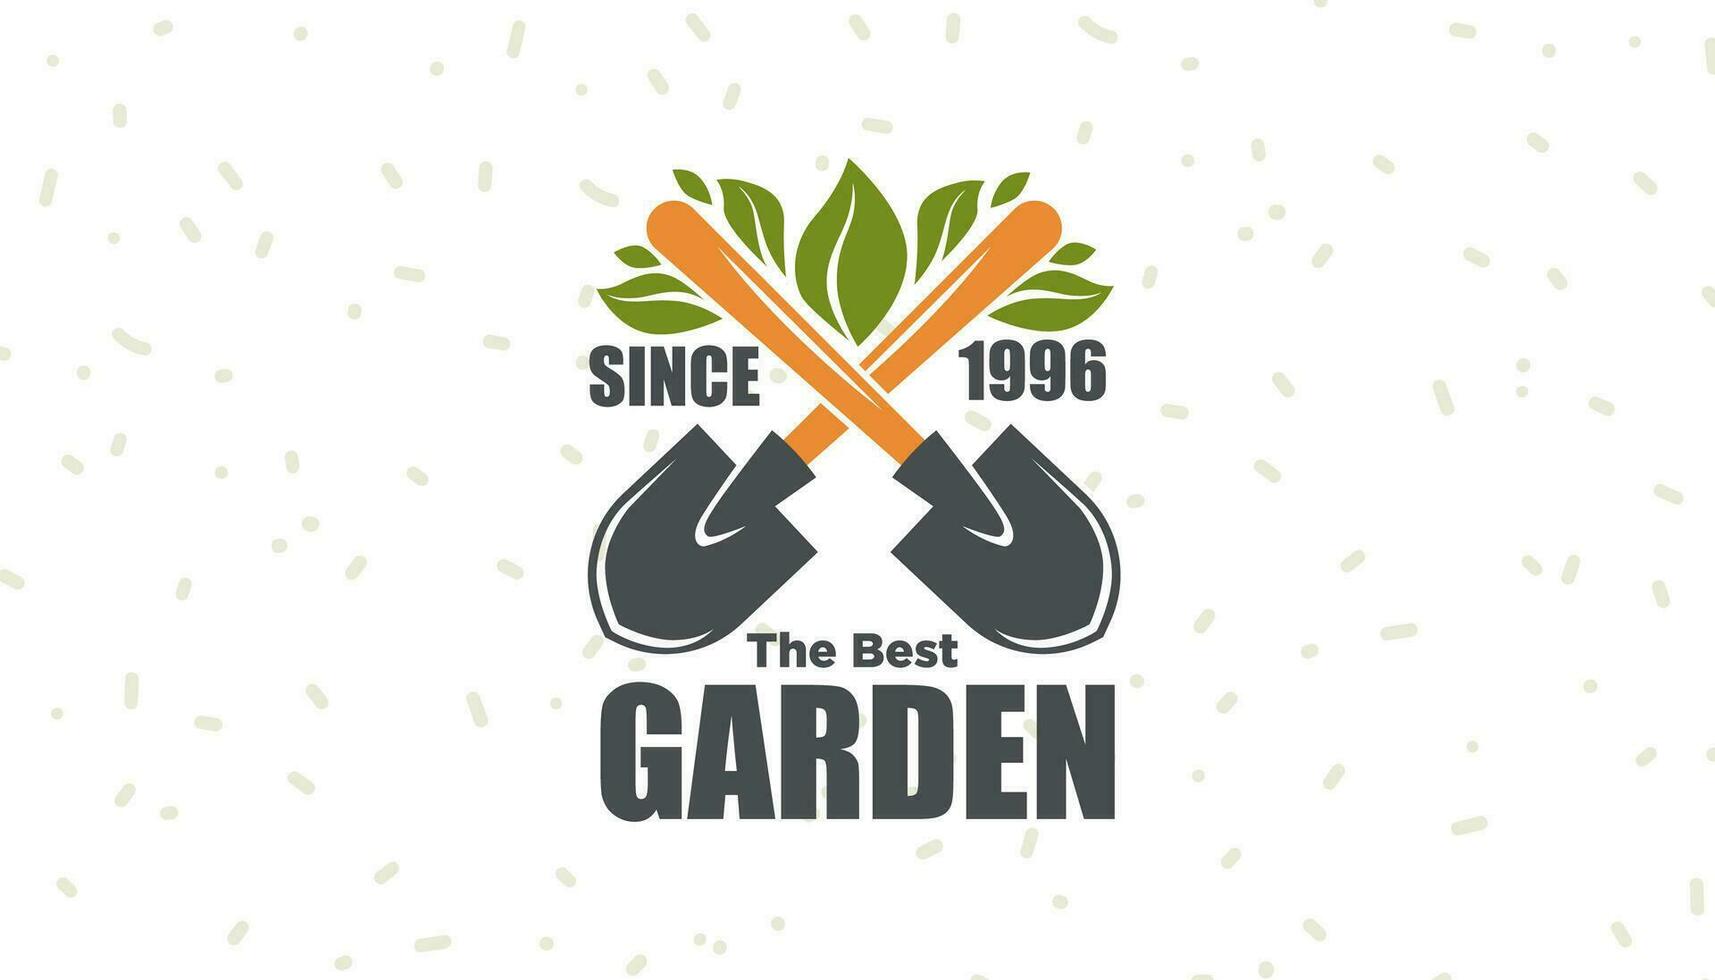 Best garden services, business or visiting card vector